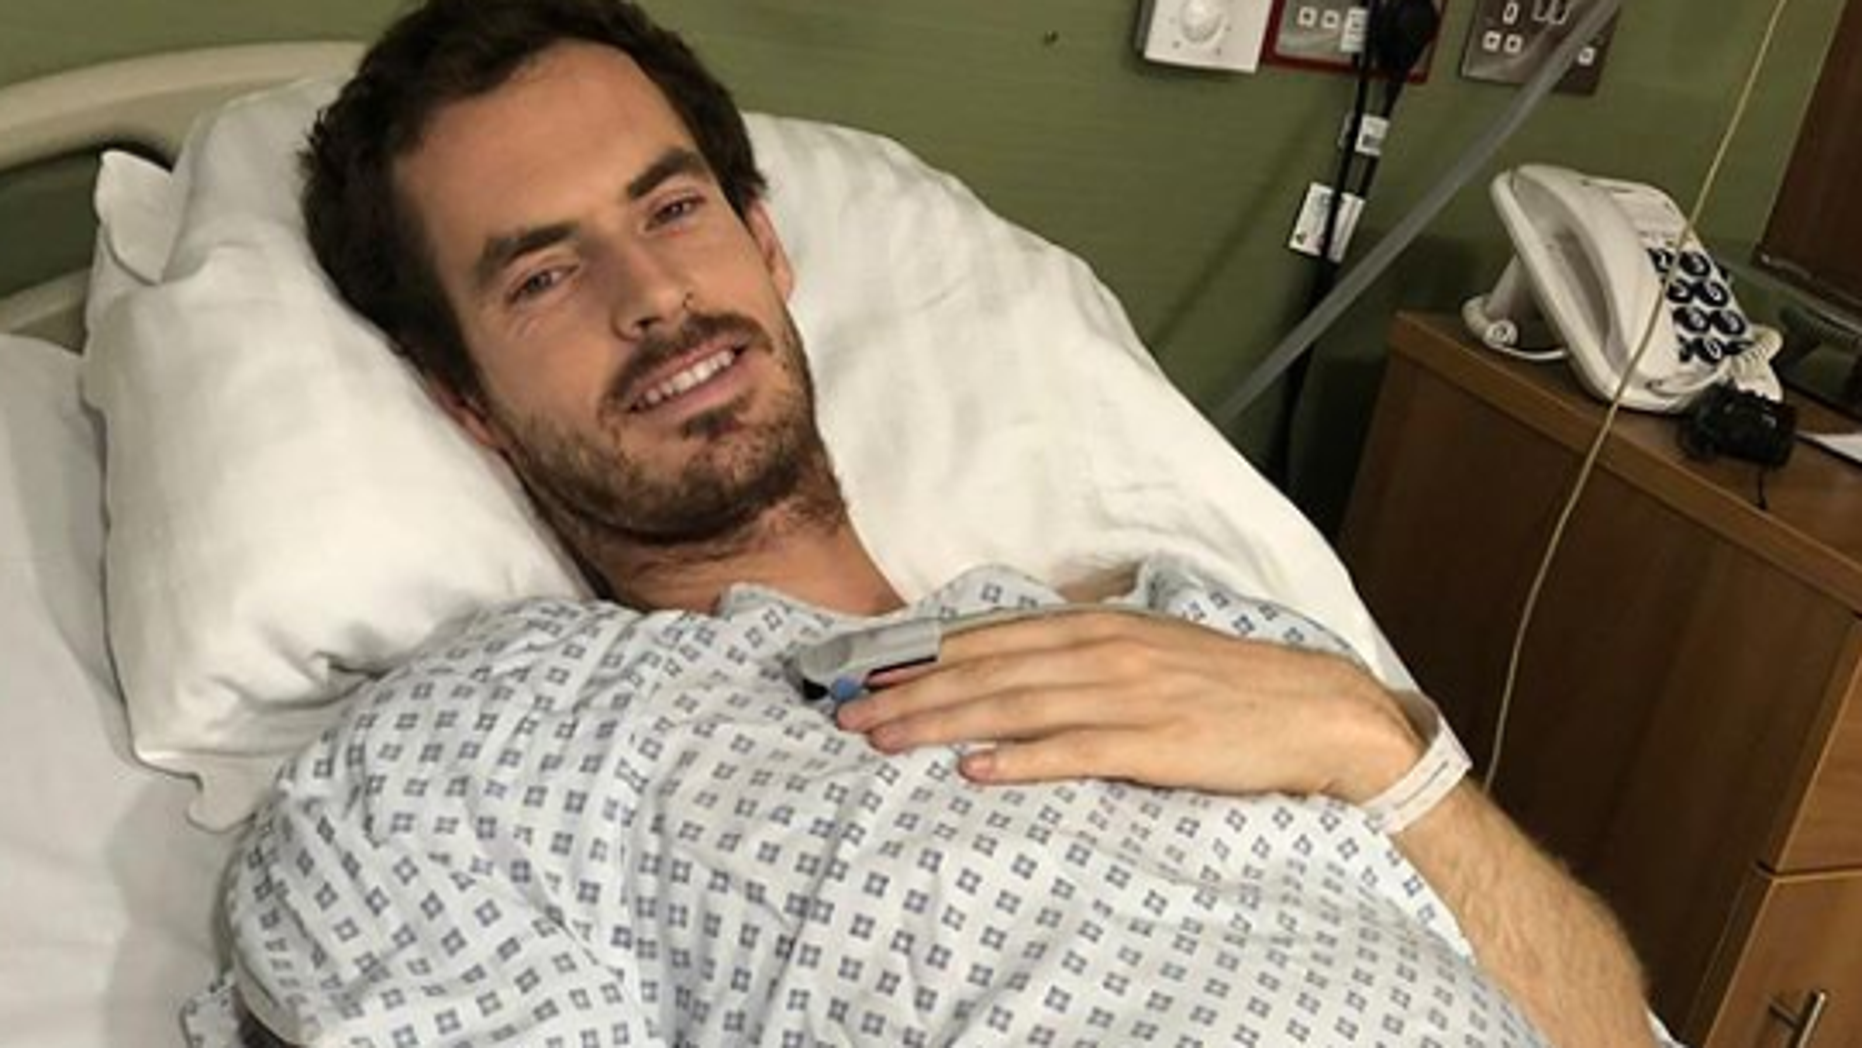 Tennis champ Andy Murray confirms hip operation, metal joint implant